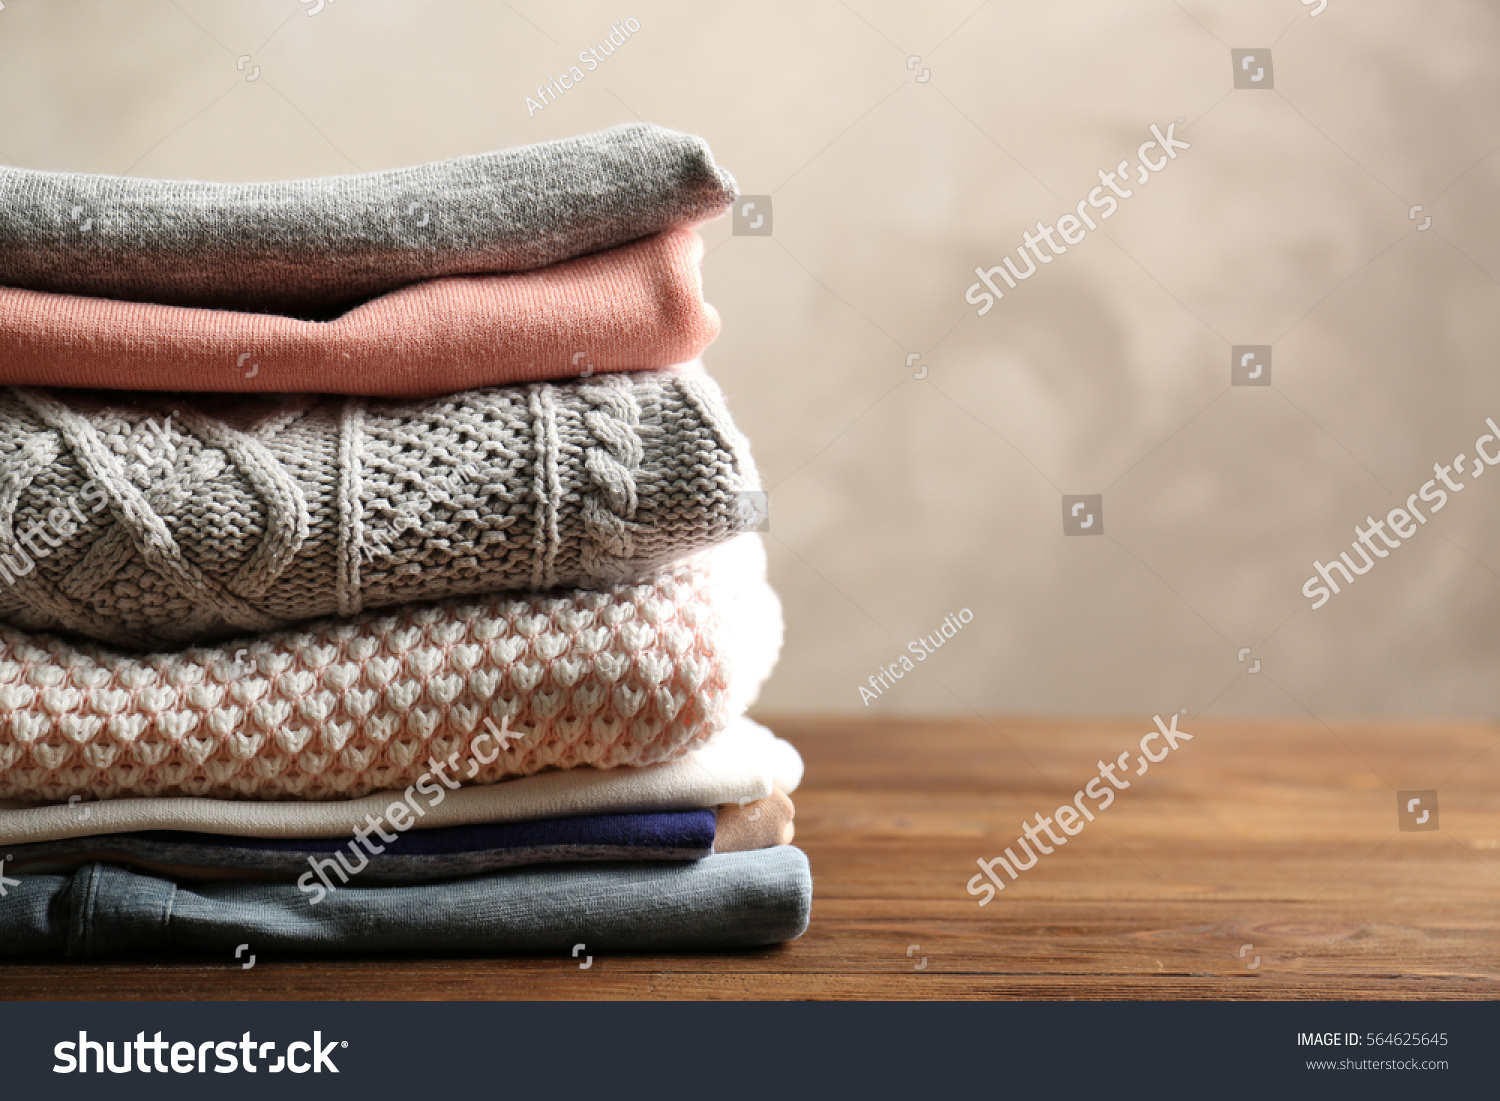 Pile of clothes on table